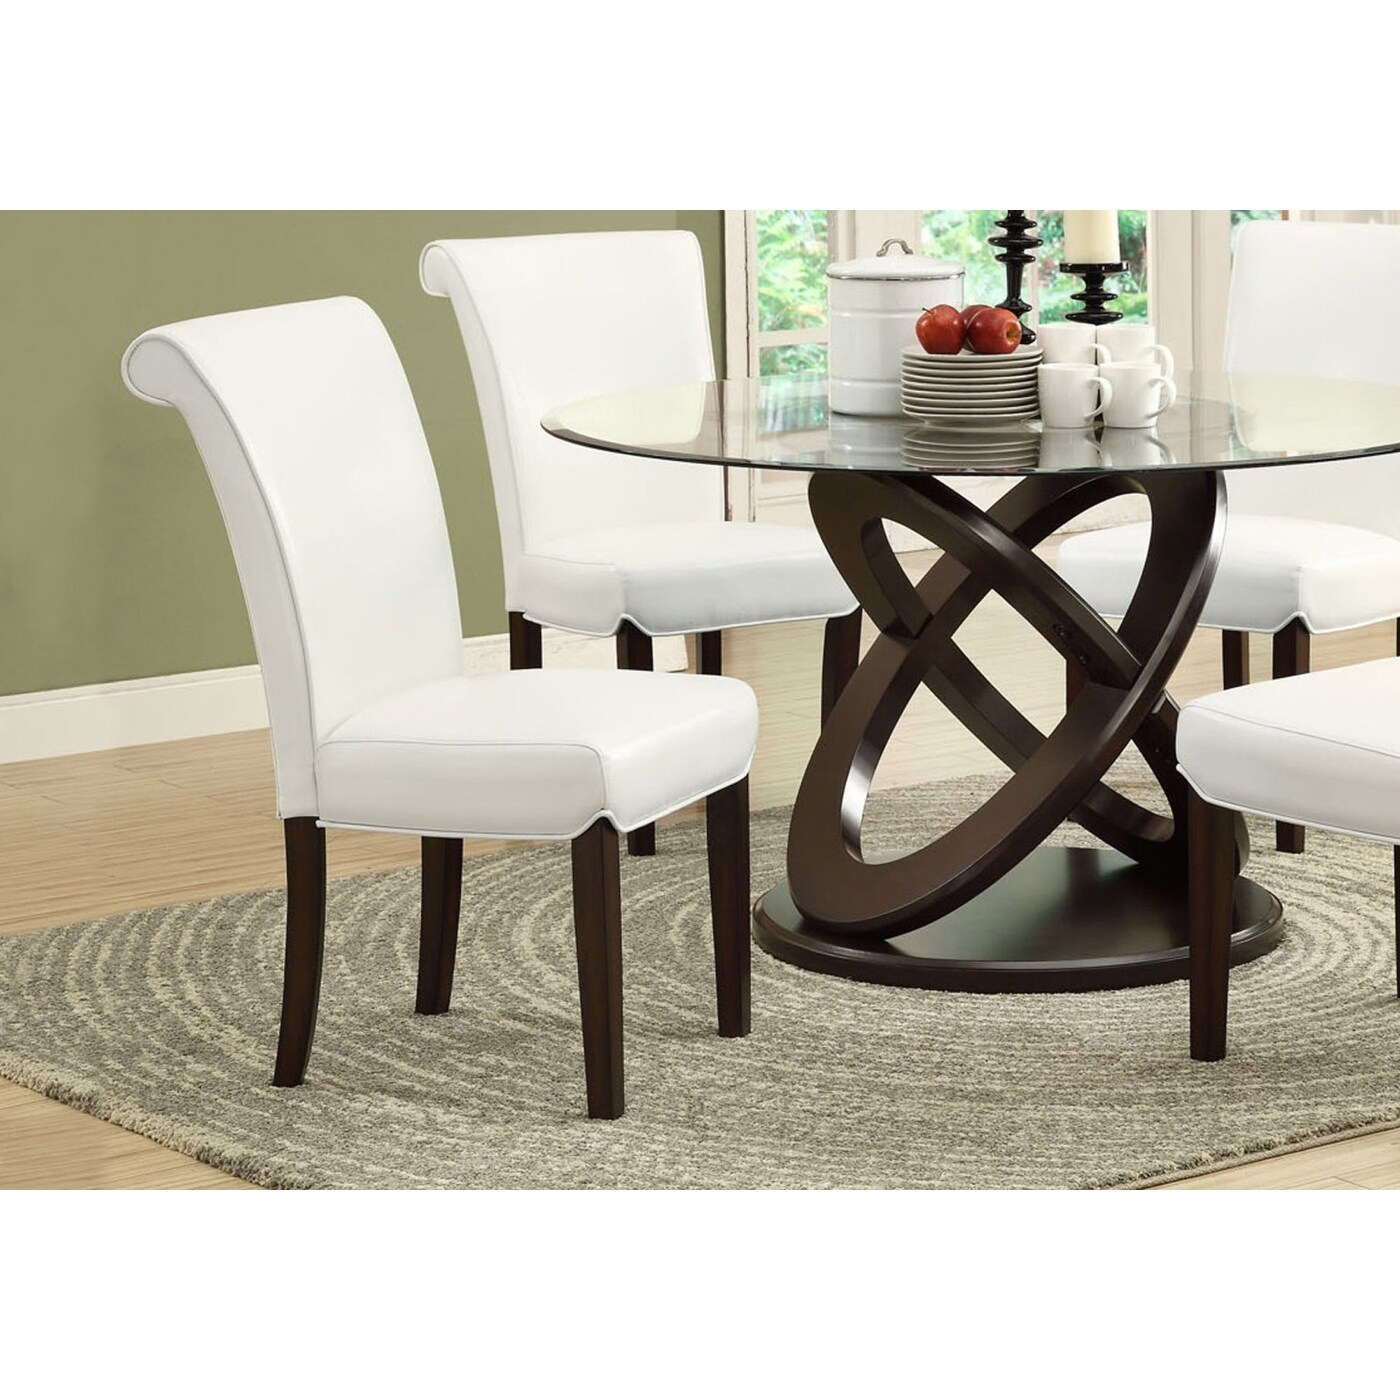 Dining Chair 2pcs 39 H Taupe Leather Look On Sale Overstock 25634160